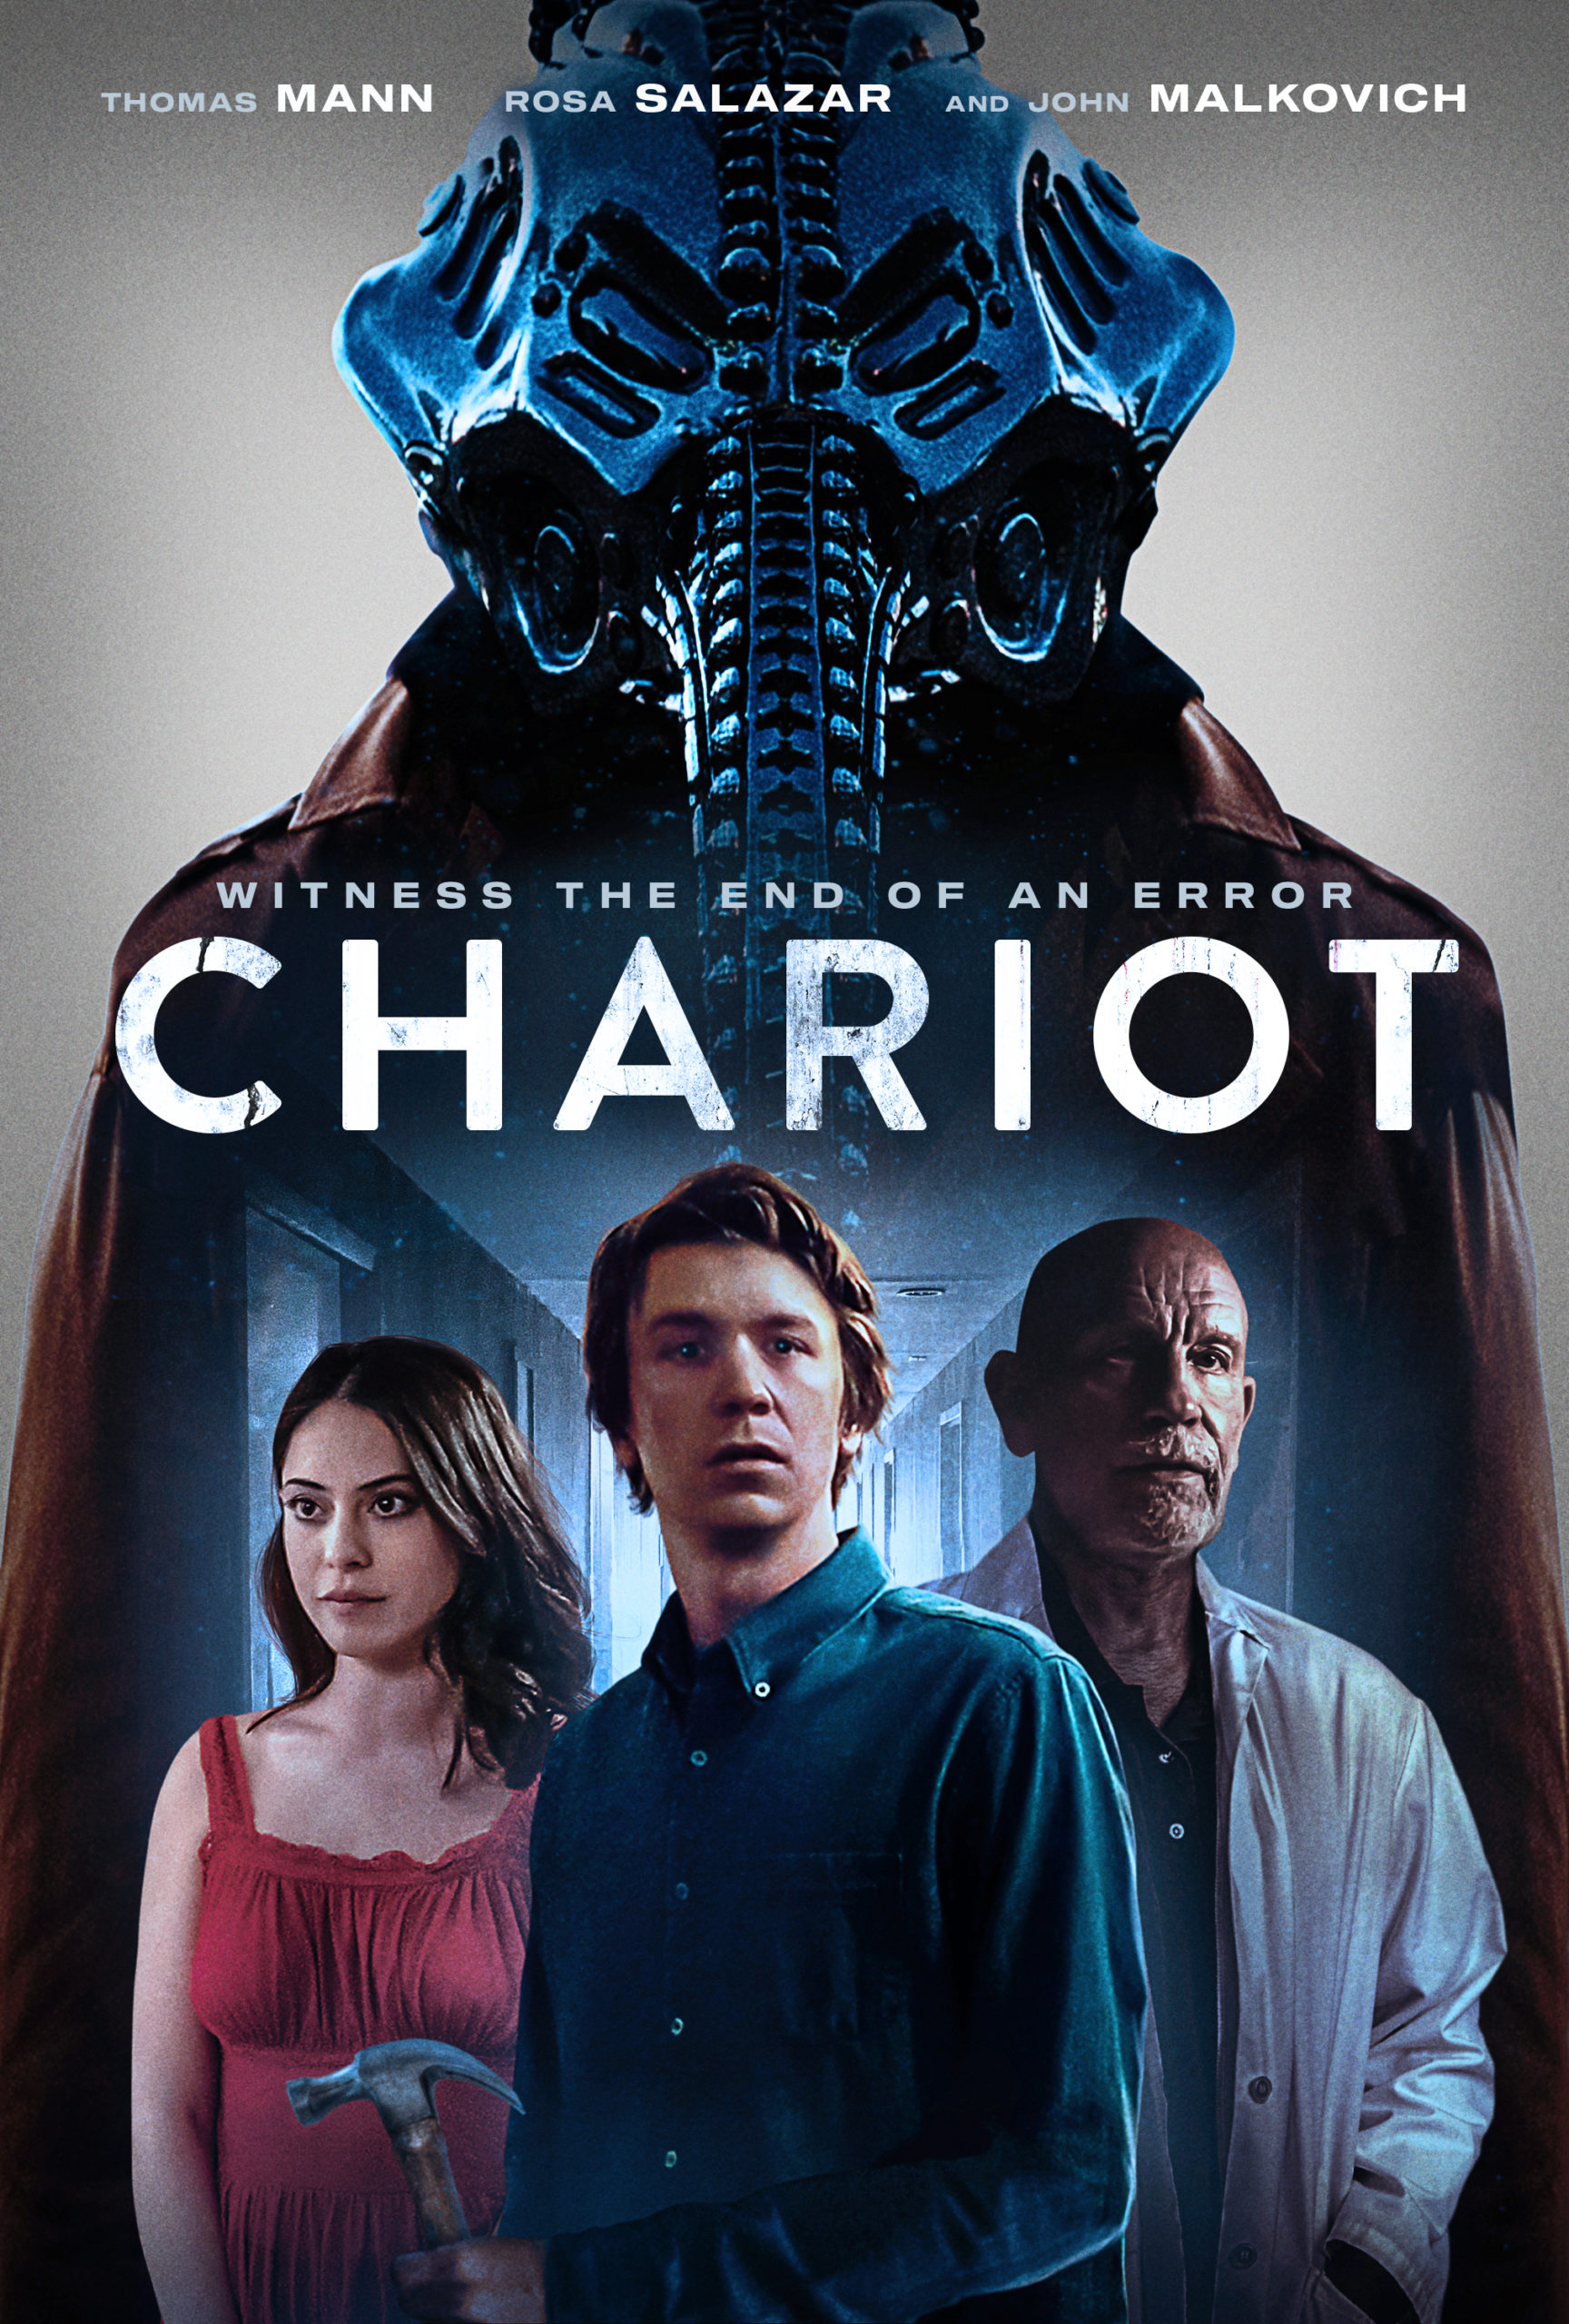 Chariot poster